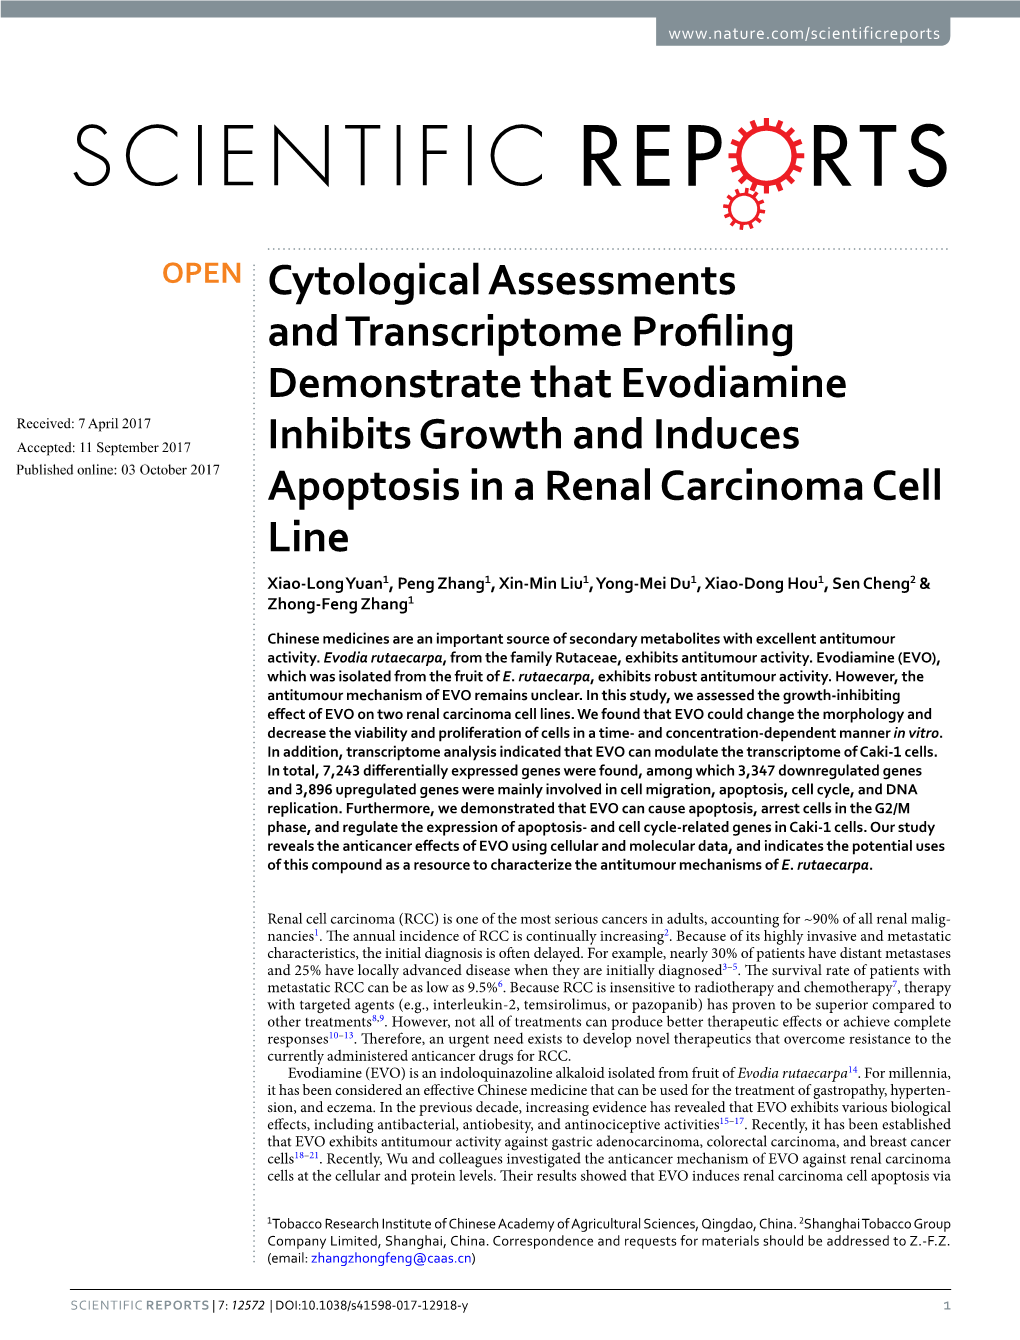 Cytological Assessments and Transcriptome Profiling